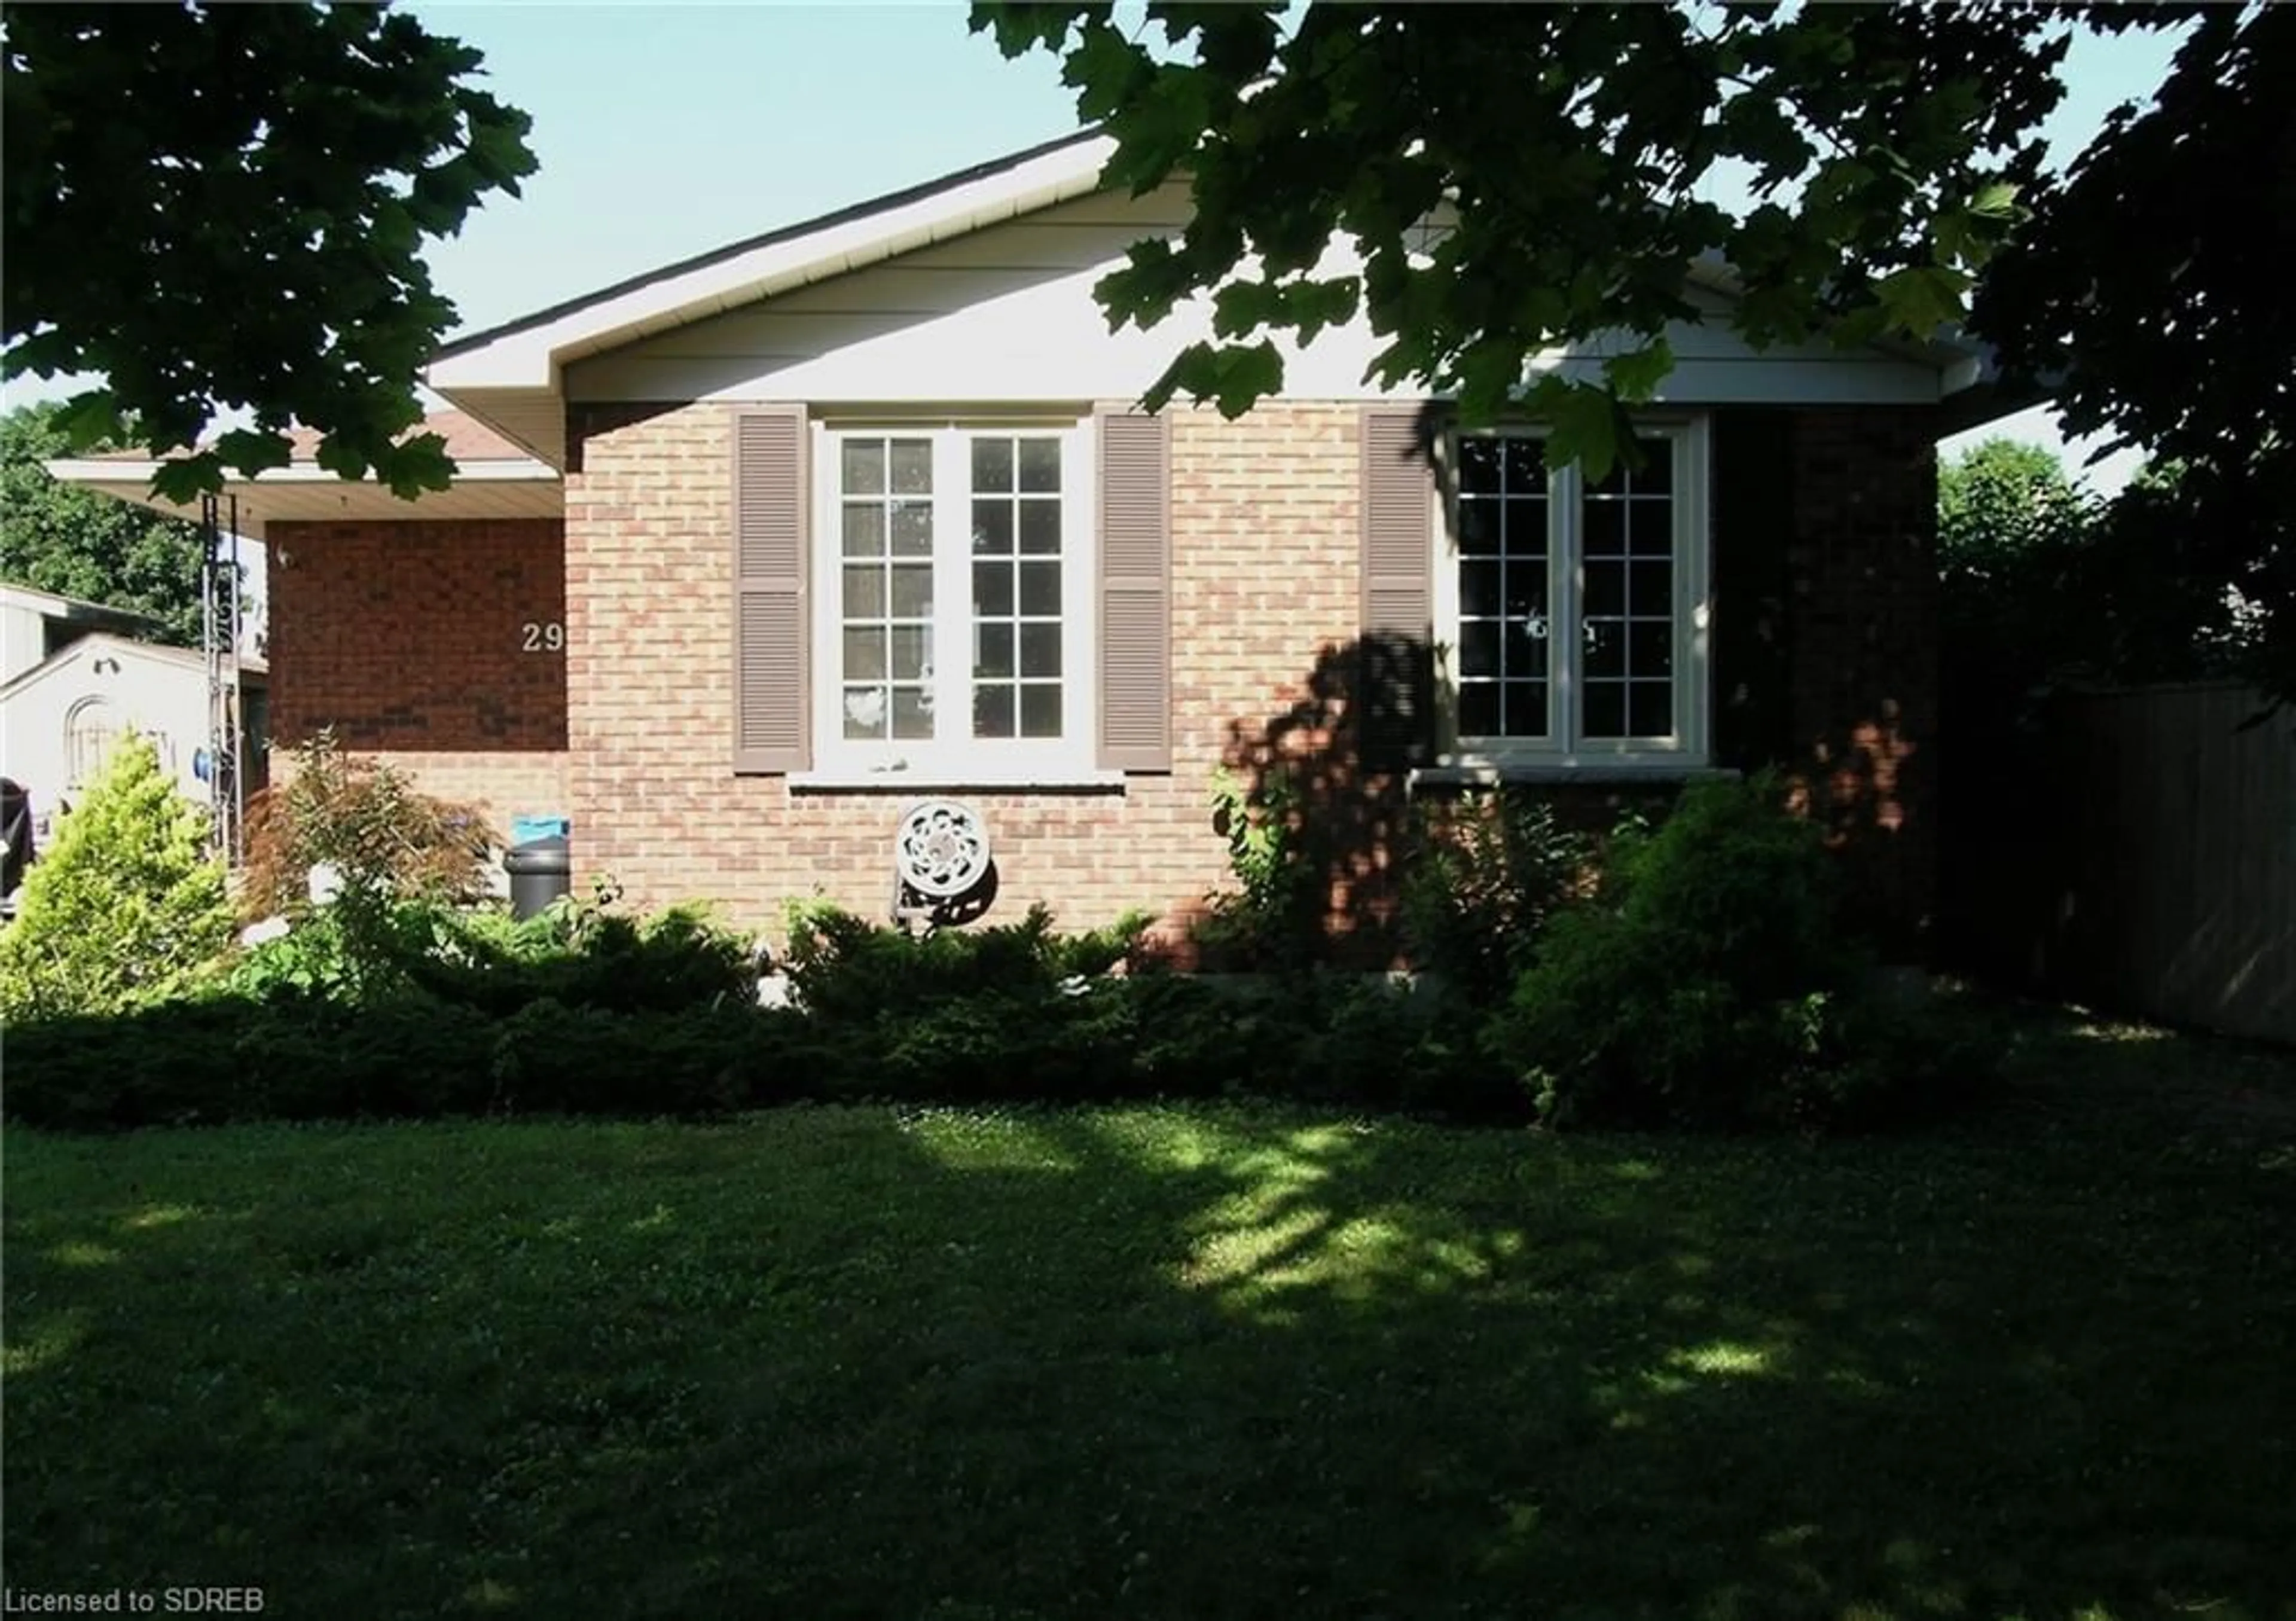 Outside view for 29 Douglas Ave, Simcoe Ontario N3Y 4X9